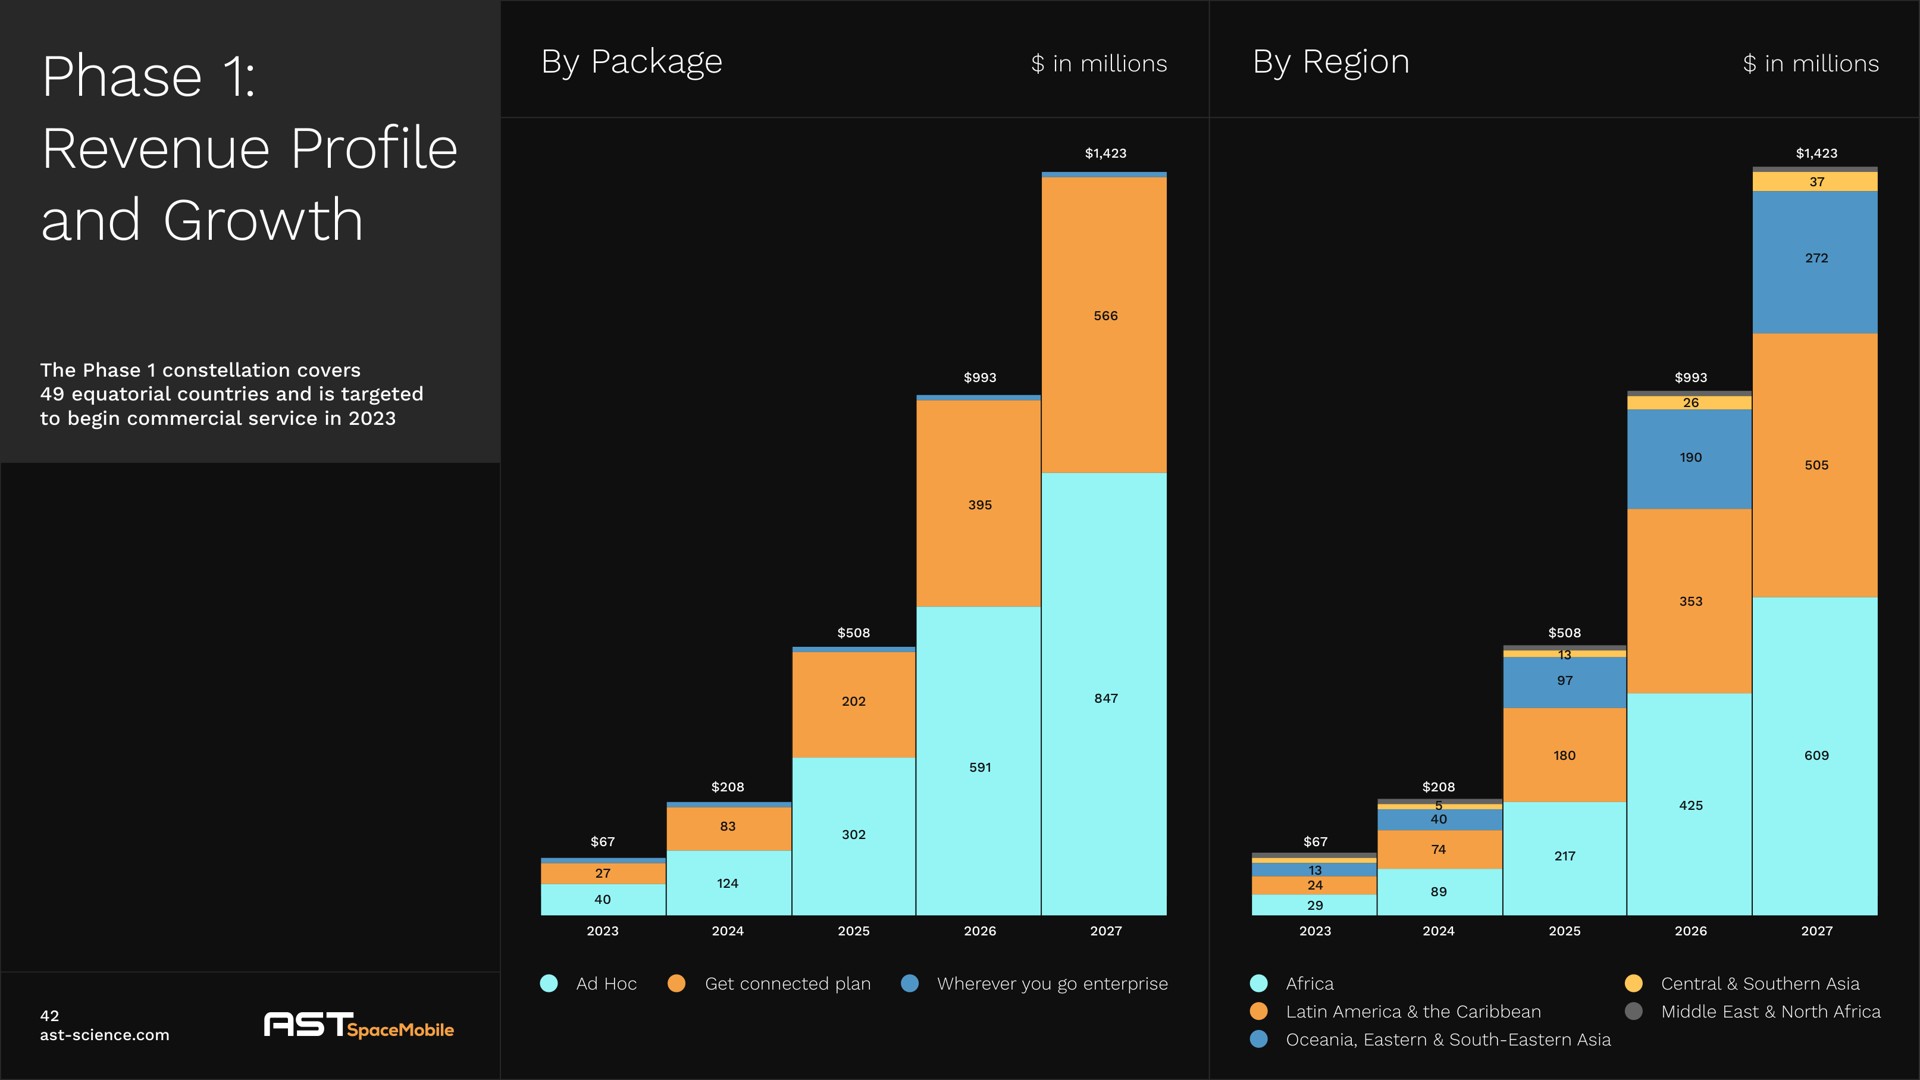 phase revenue profile and growth by package by region | AST SpaceMobile